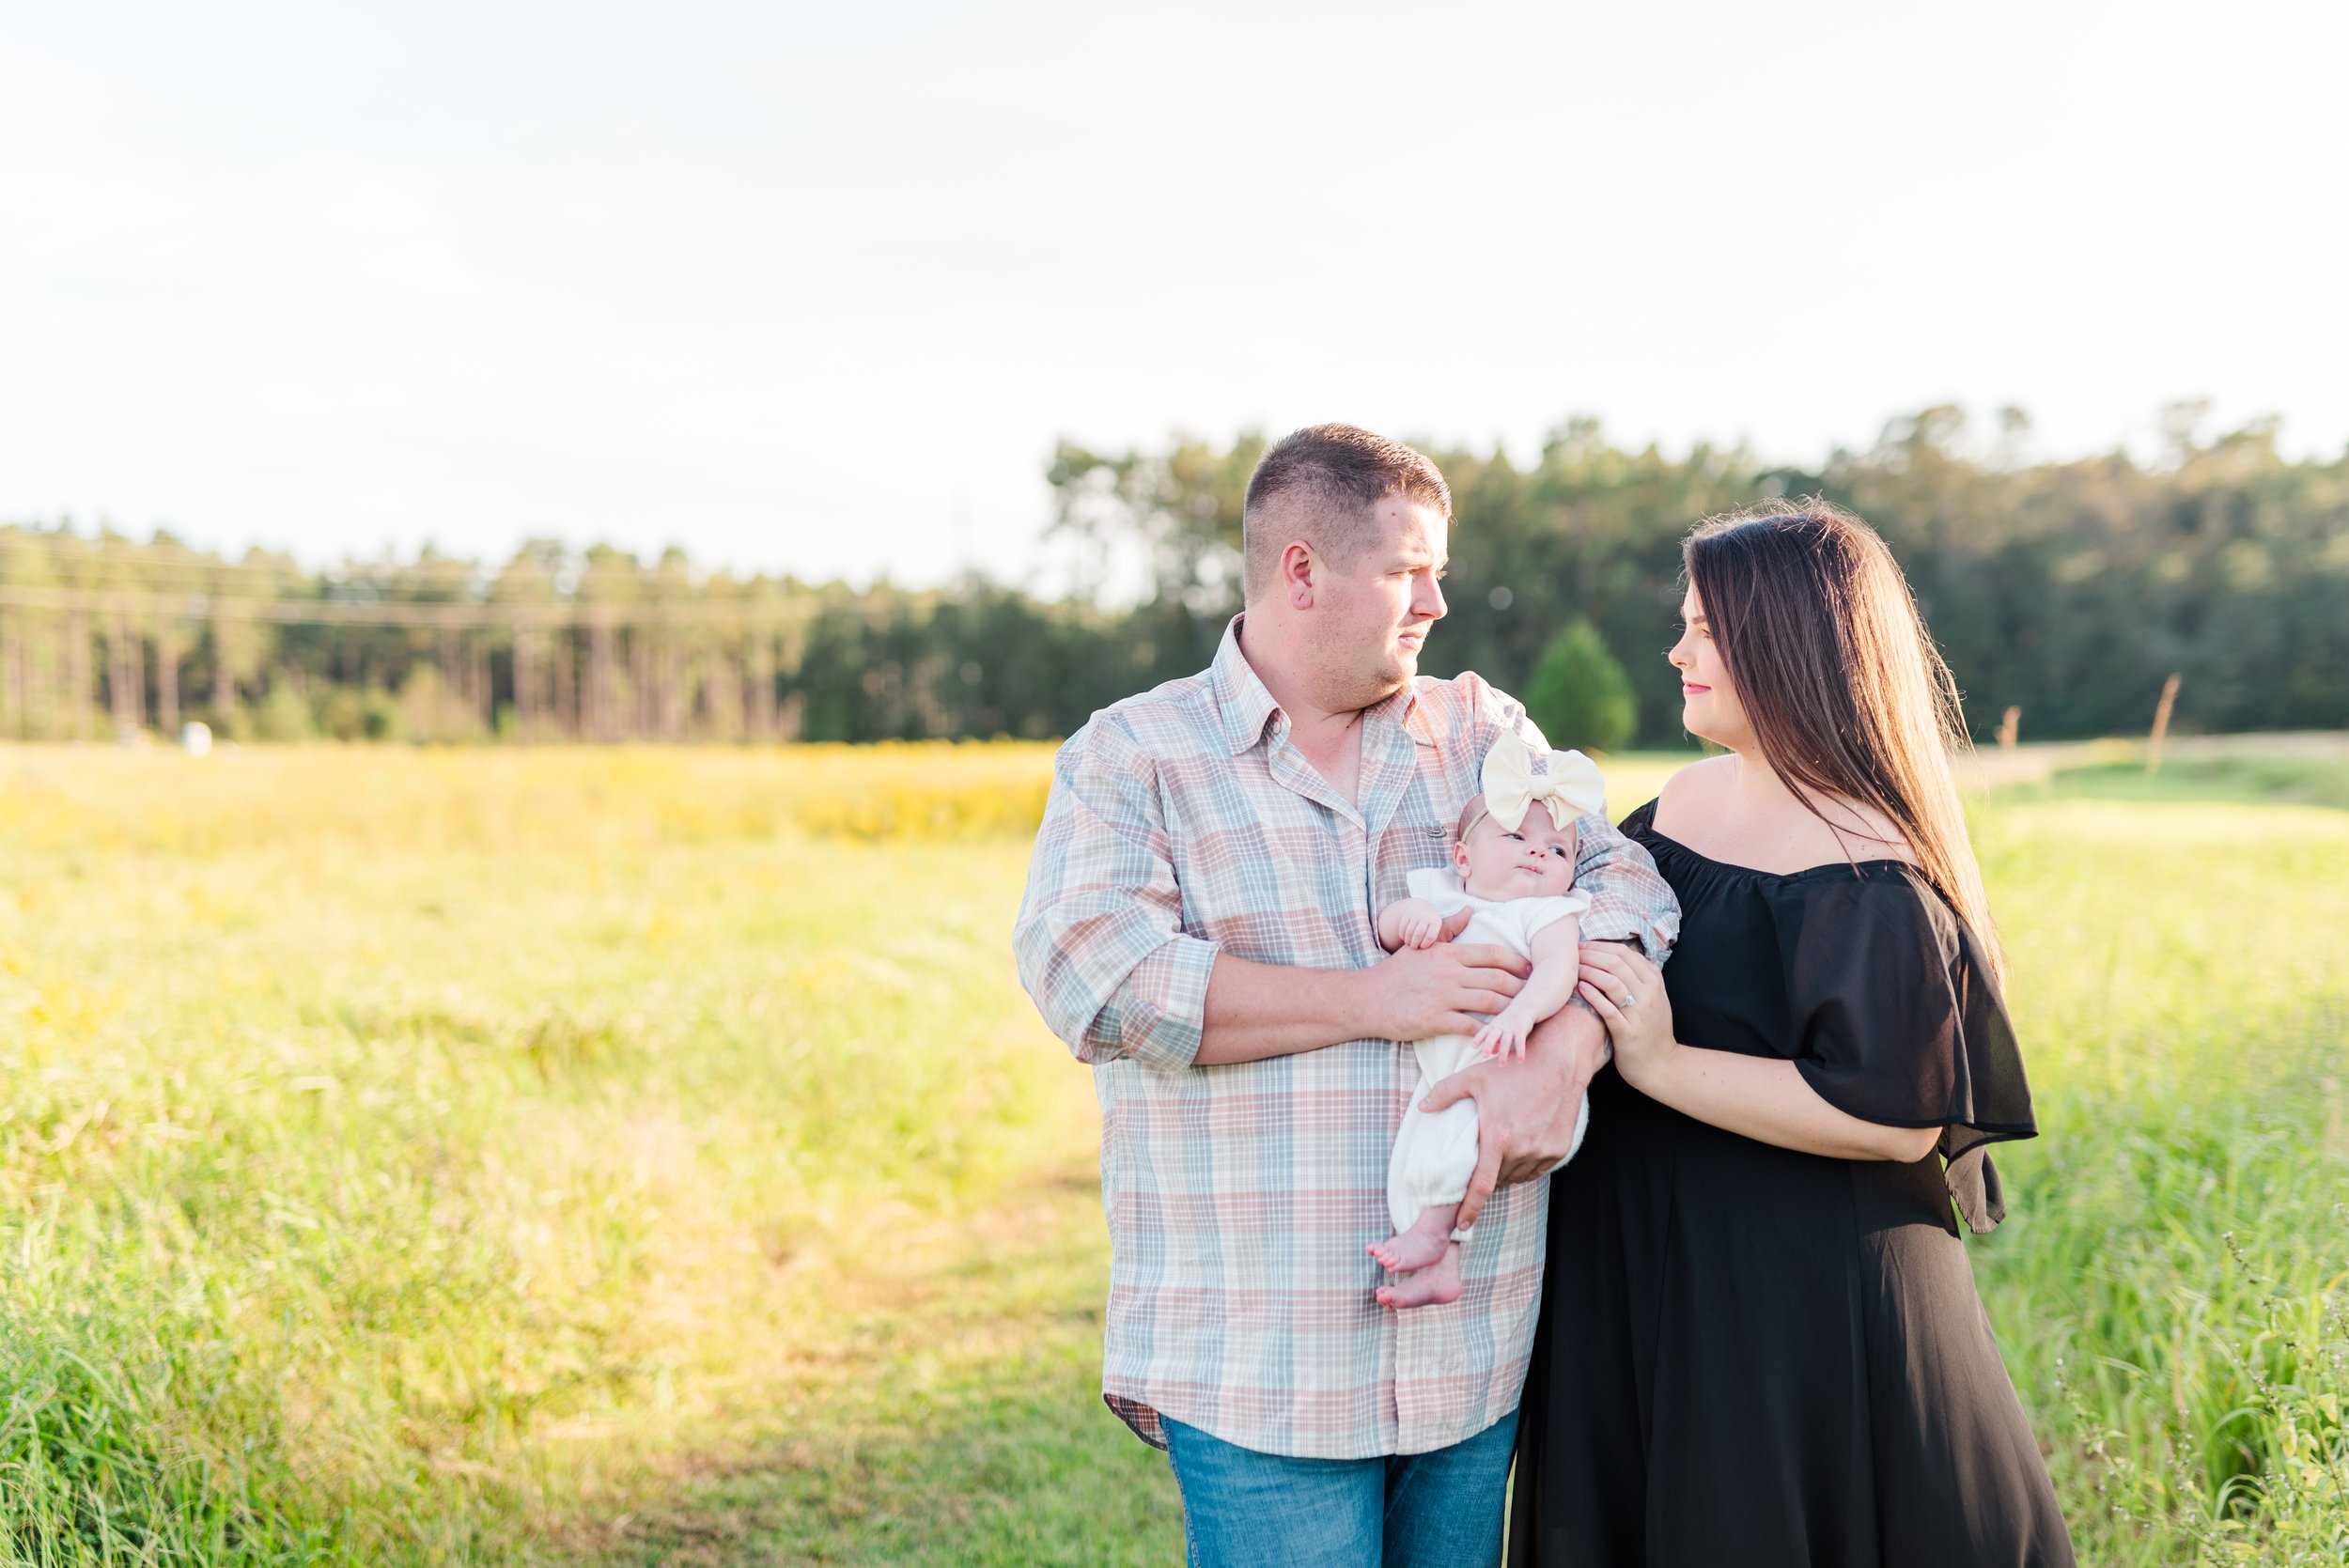 Fall Family Mini Photoshoot in Mobile, Alabama Photographed by Kristen Marcus Photography